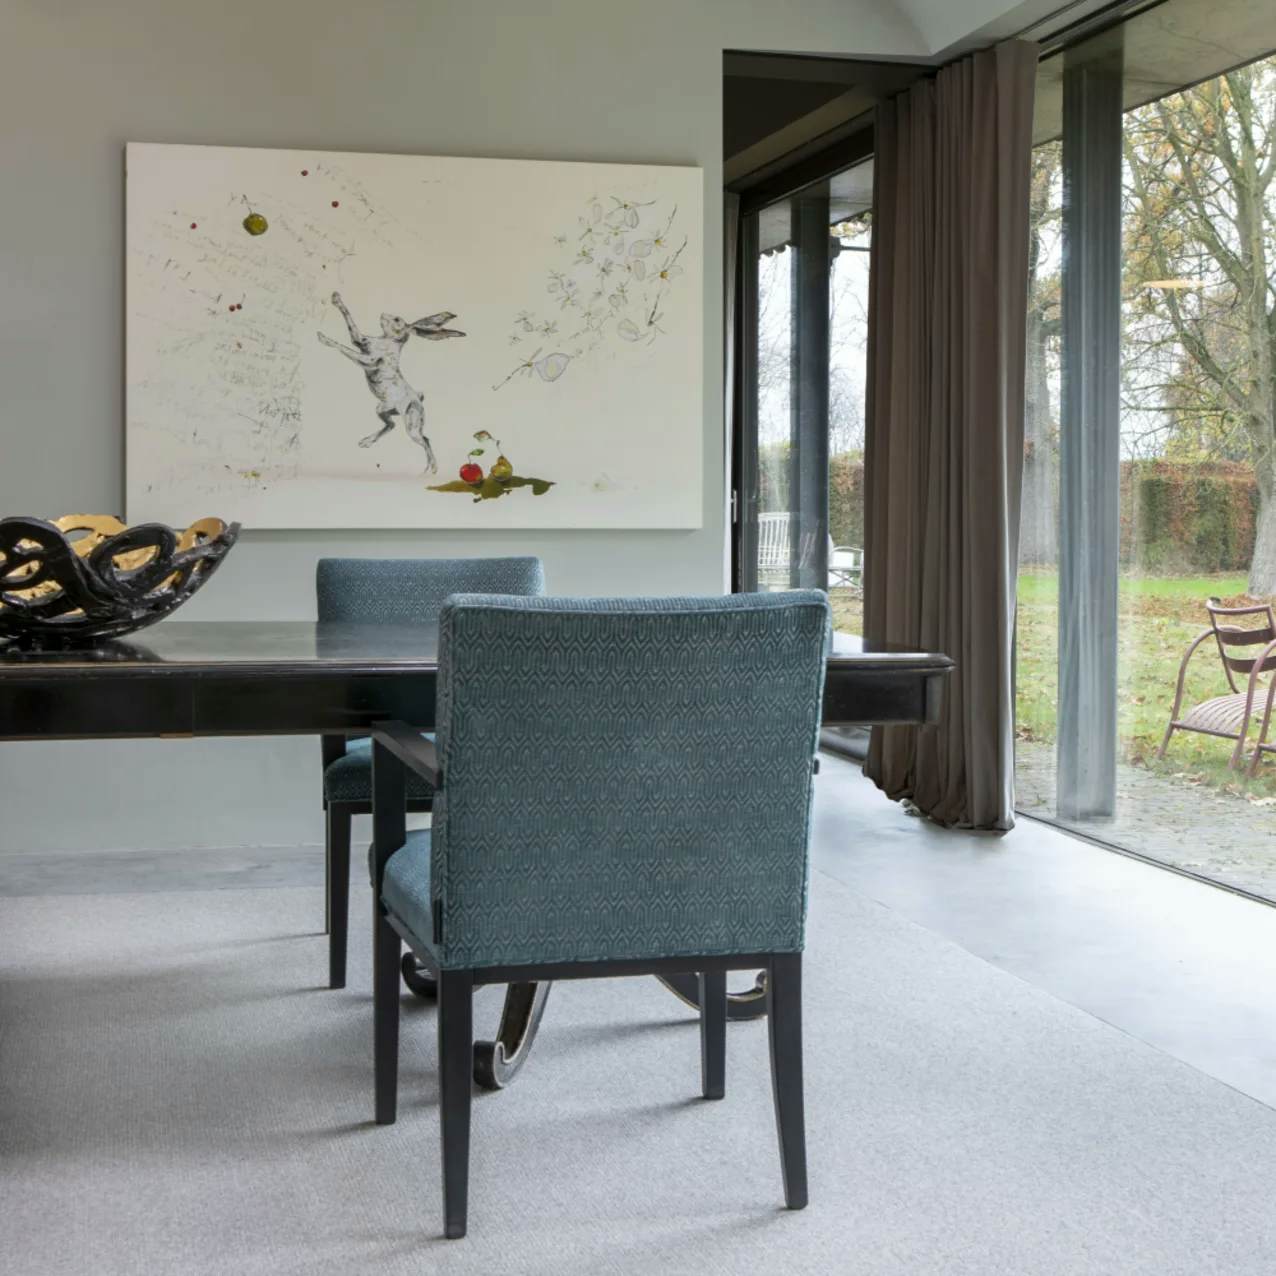 The Sweater Seashell dining room wool rug in elegant home